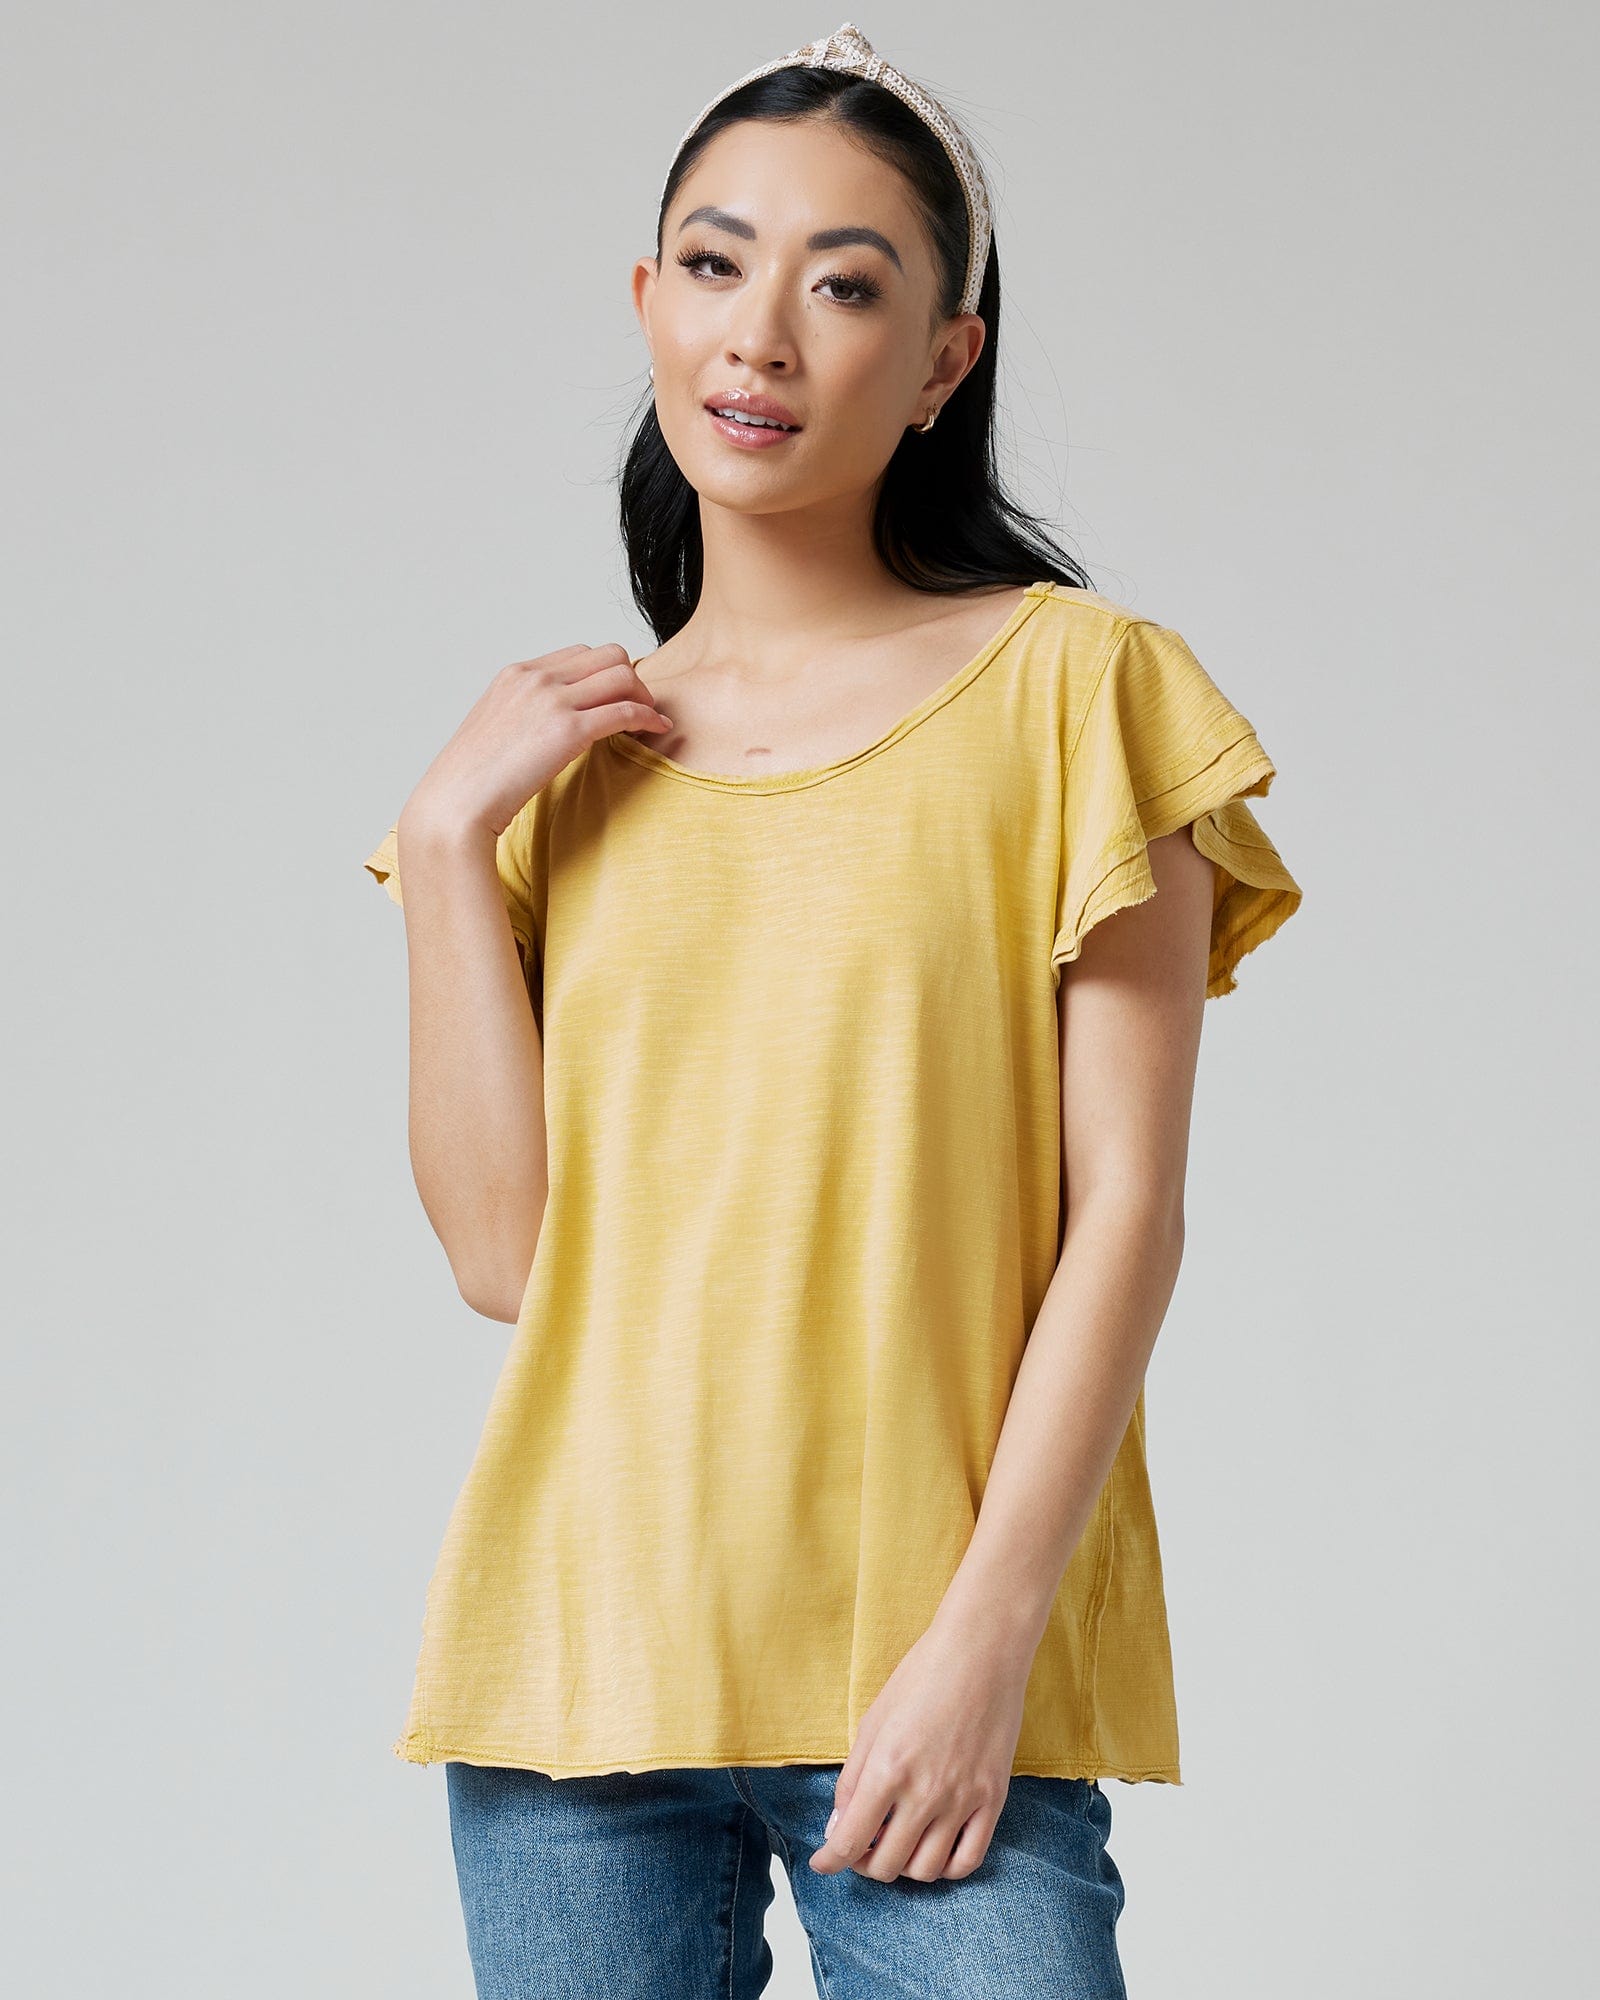 Woman in a top with short, flutter sleeves